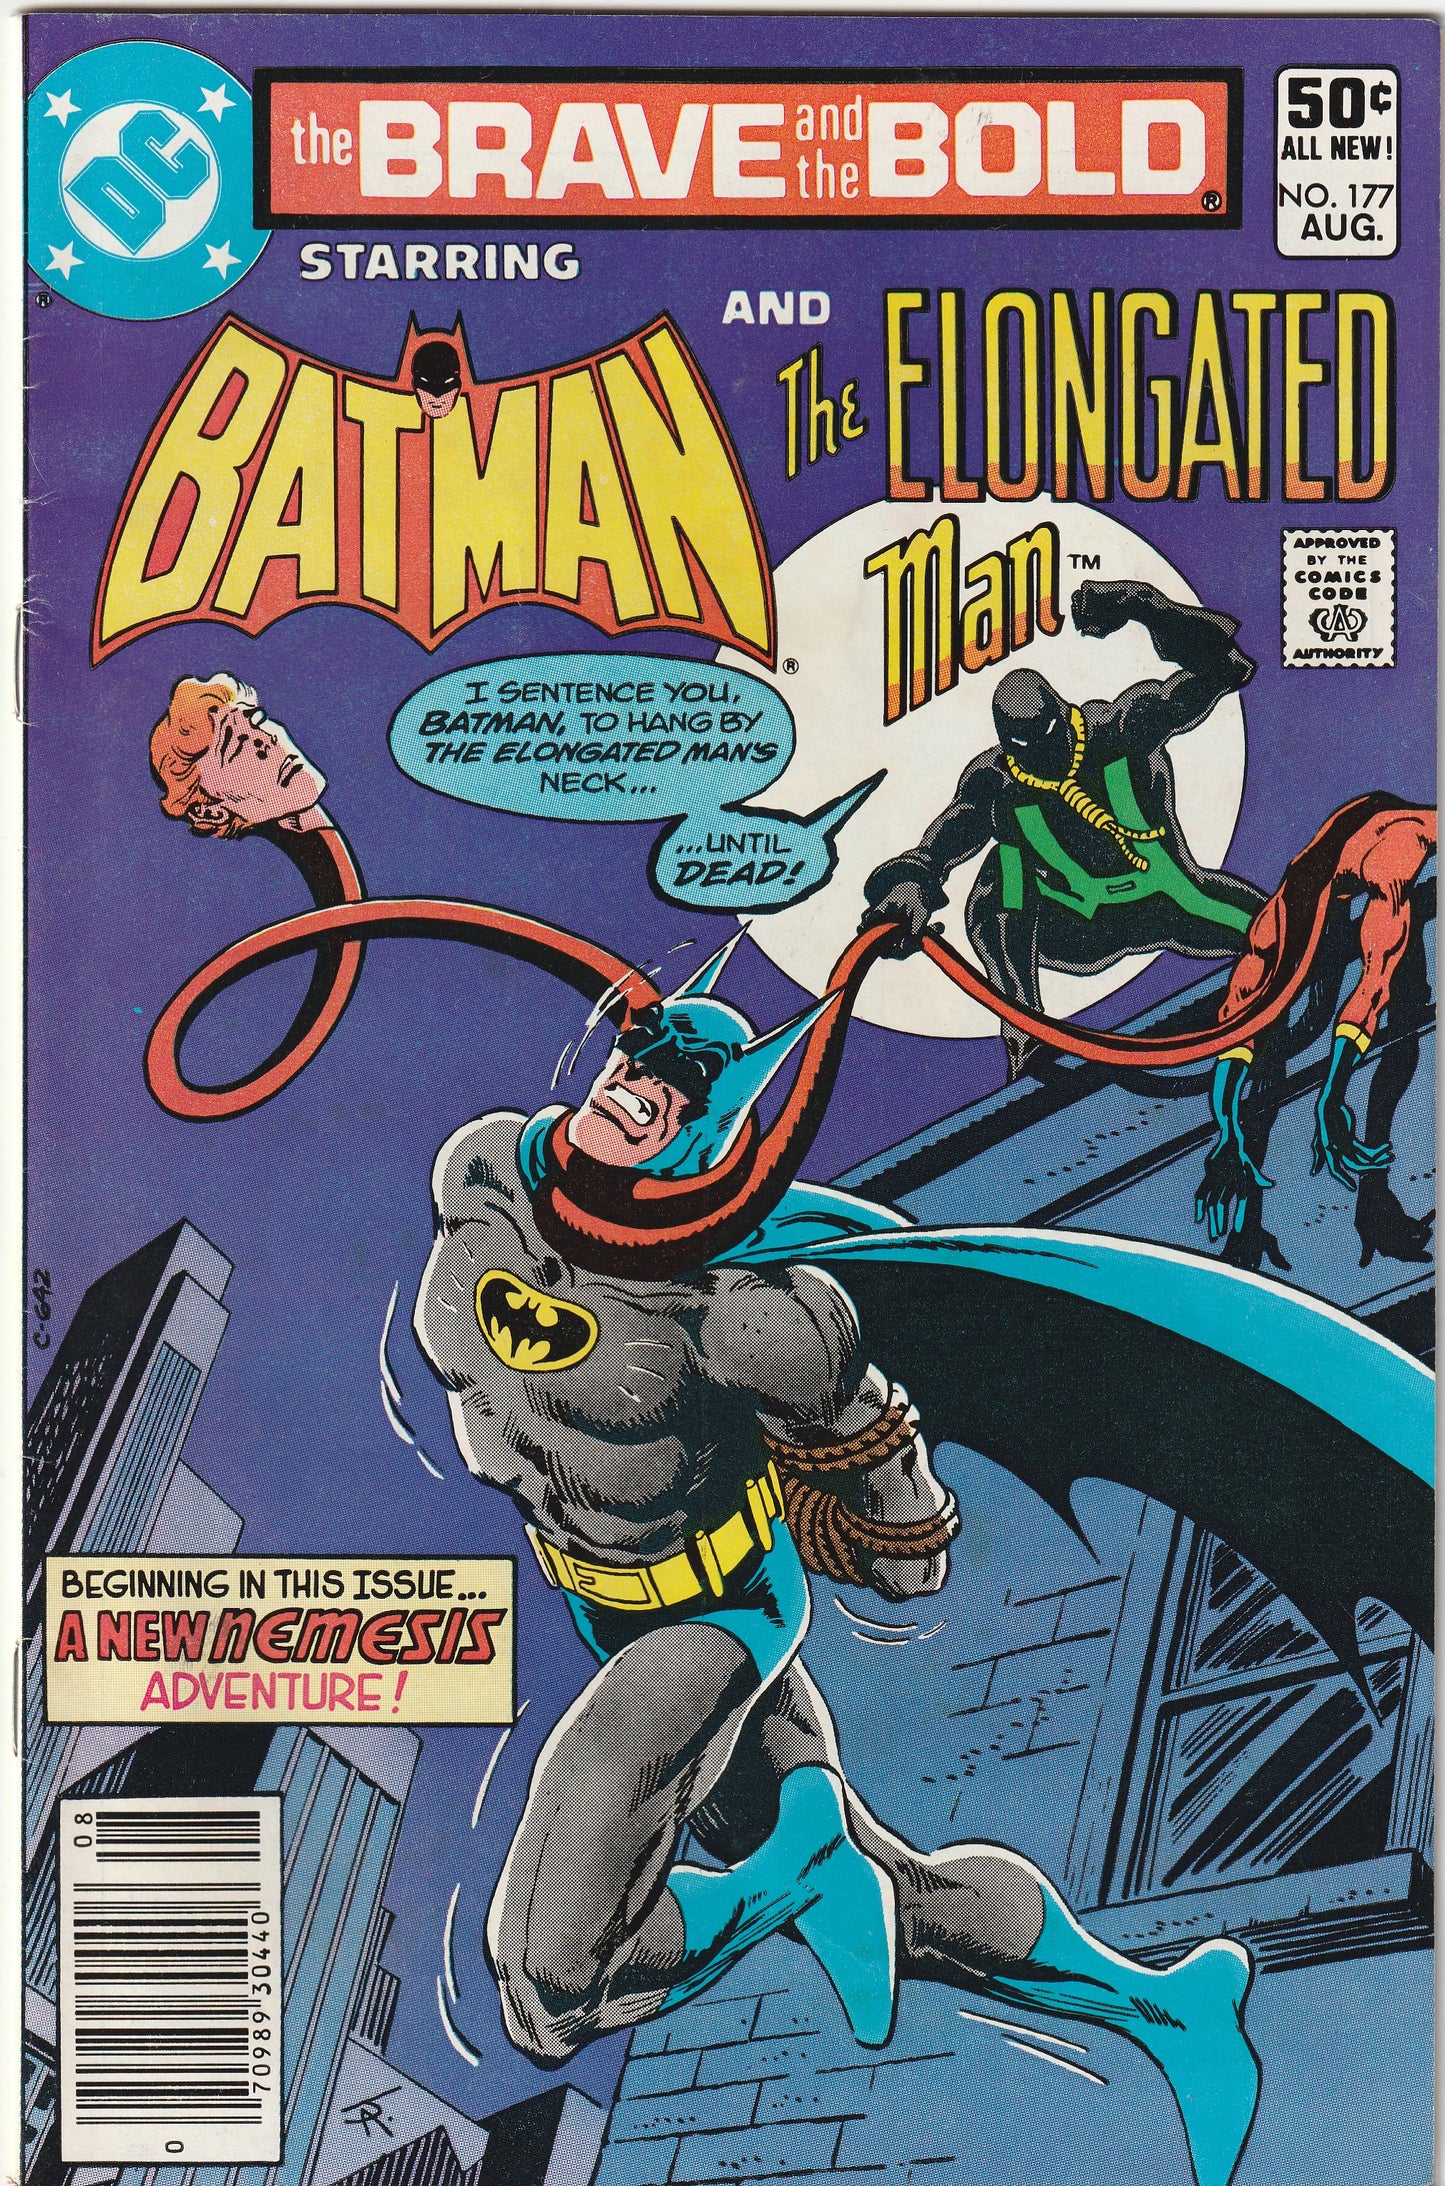 Brave and the Bold #177 (1981) - Batman & The Elongated Man